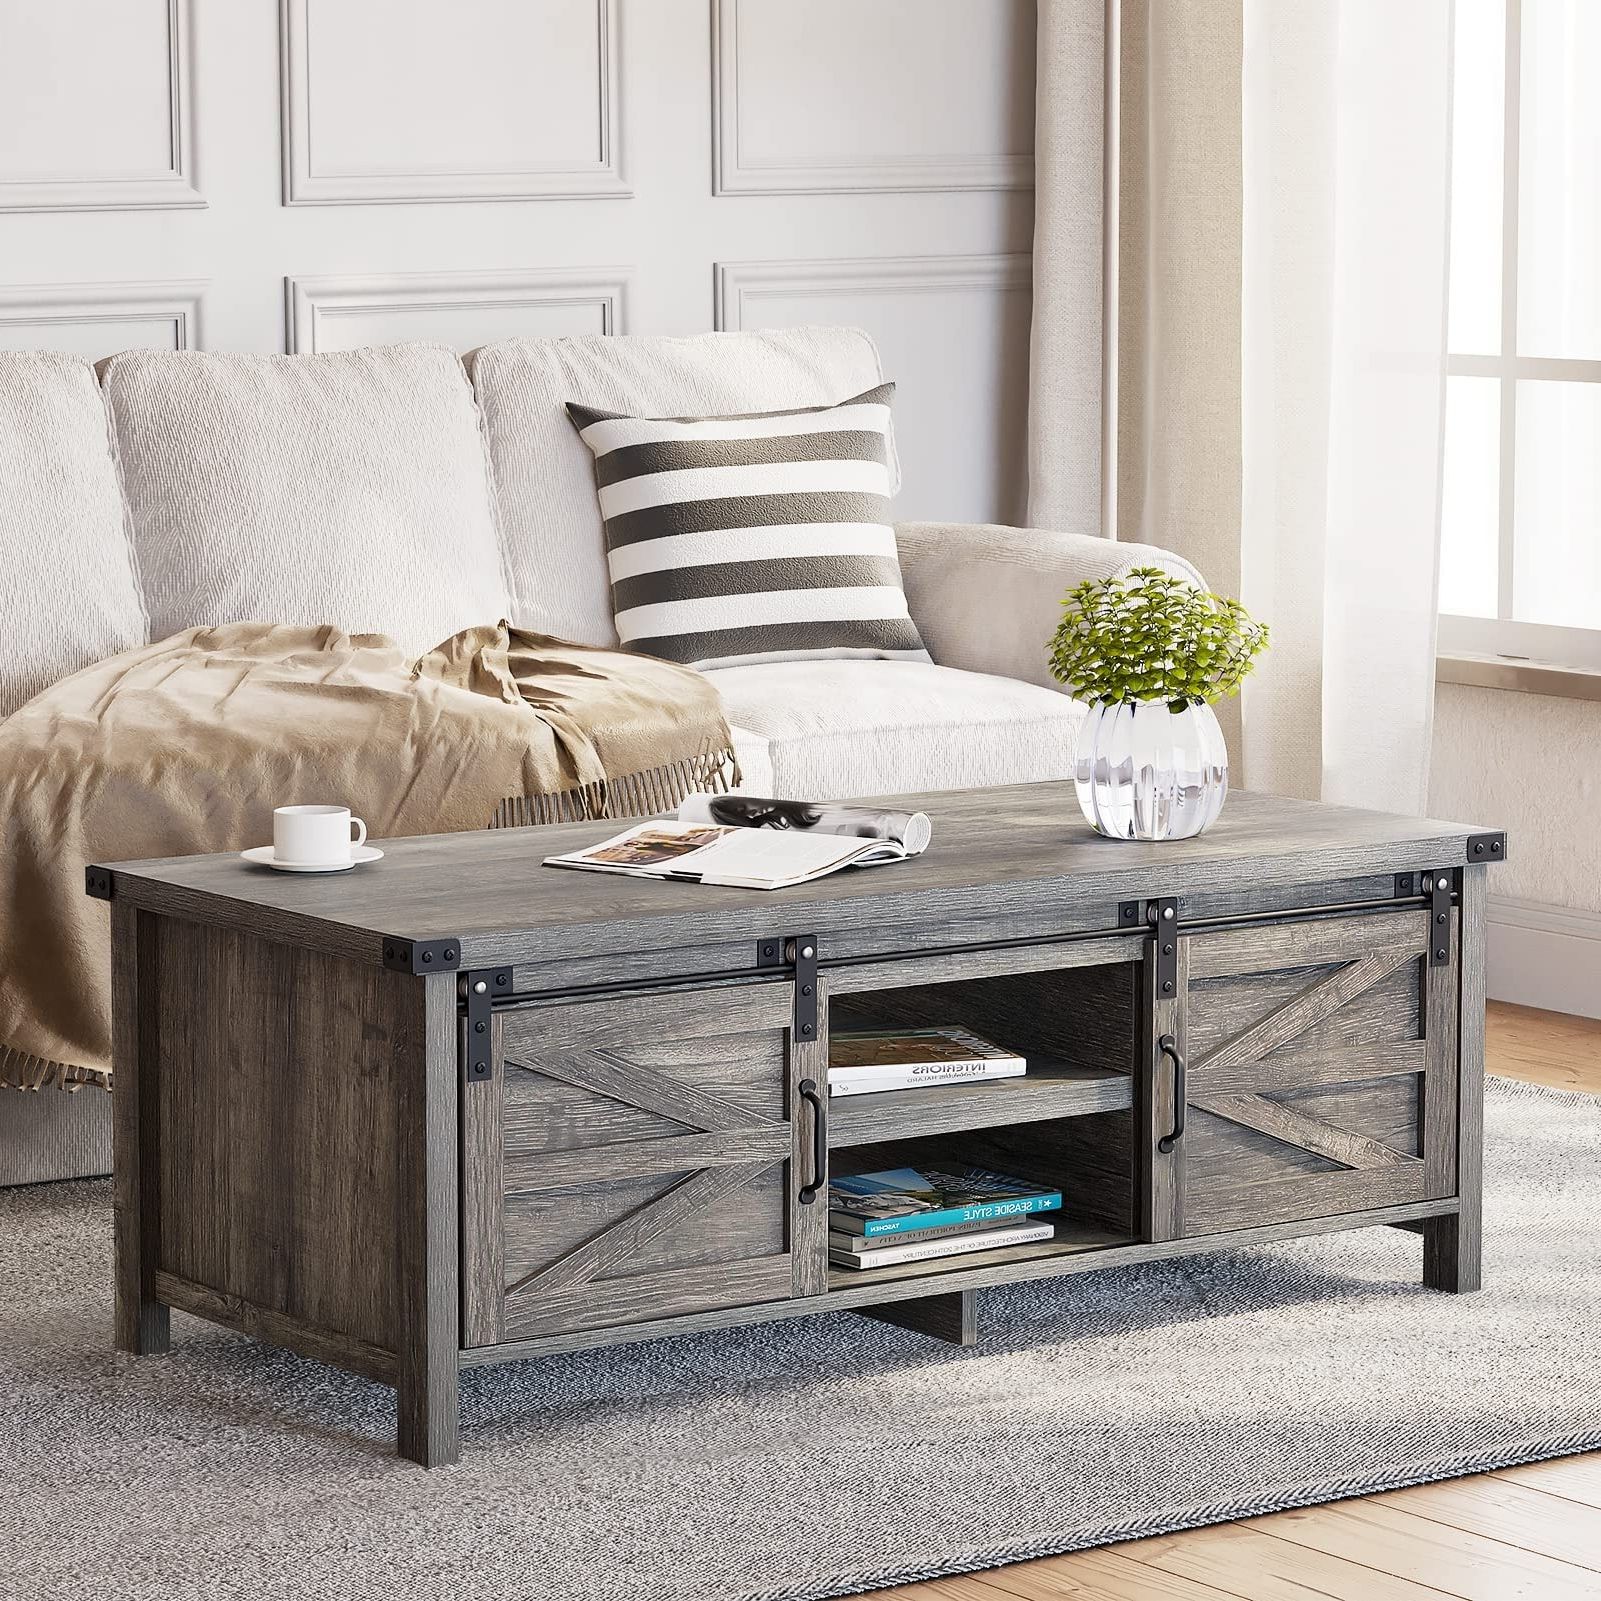 Most Recent Farmhouse Coffee Table With Sliding Barn Doors & Storage, Grey Rustic  Wooden Center Rectangular Tables – Bed Bath & Beyond – 37841722 With Regard To Coffee Tables With Storage And Barn Doors (Photo 5 of 10)